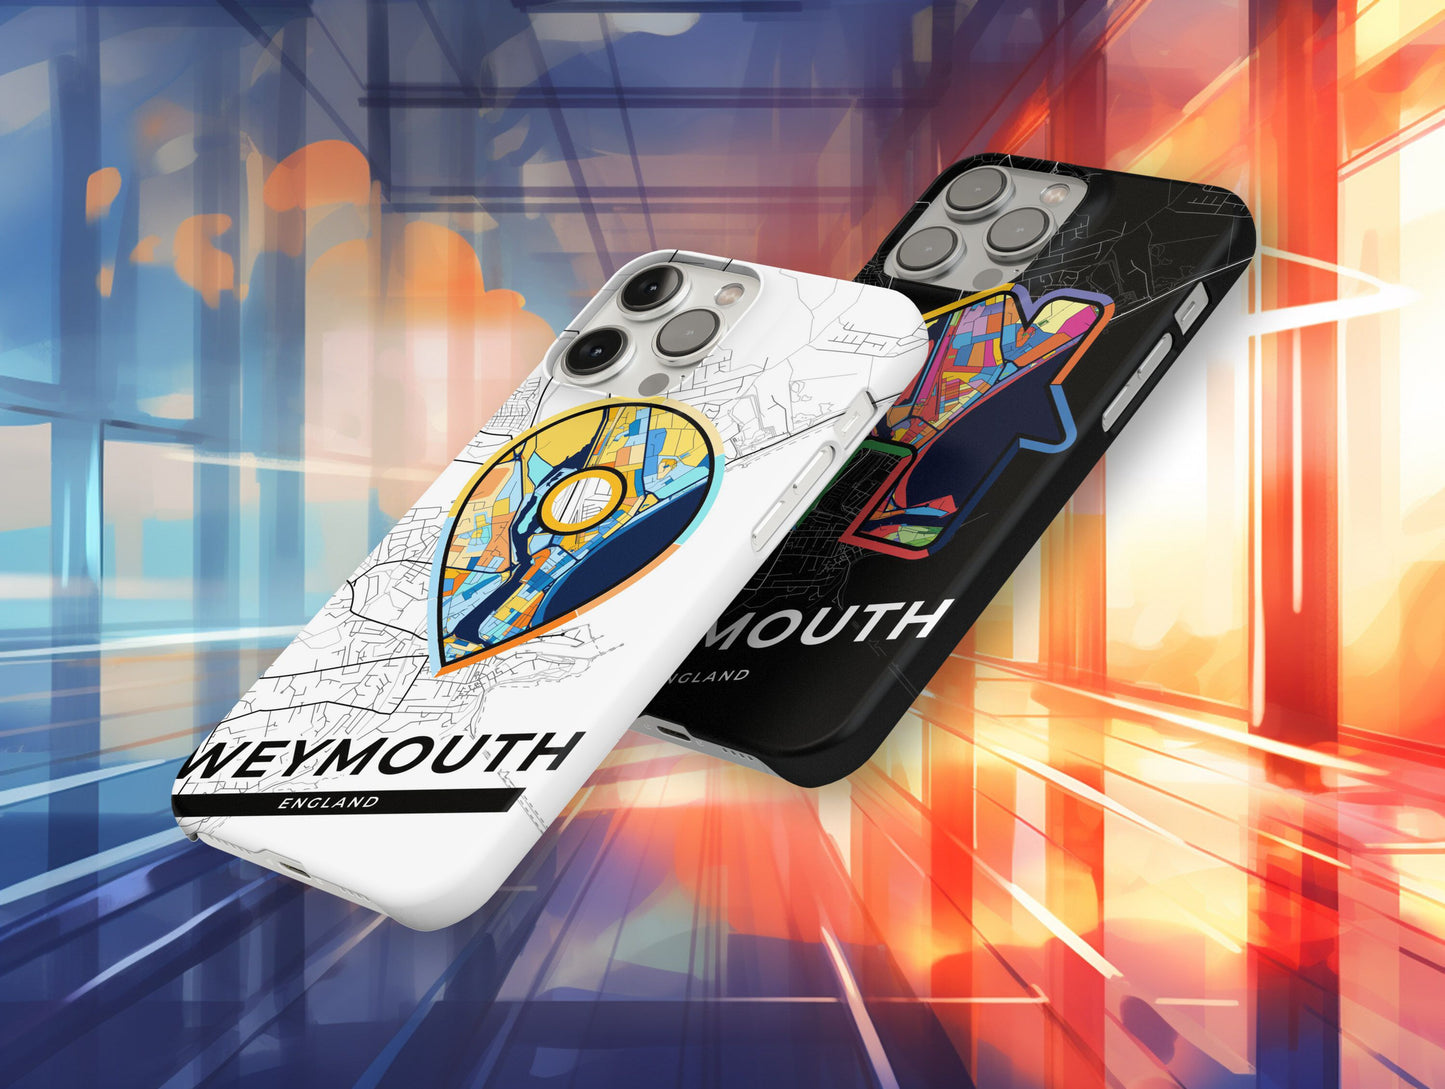 Weymouth England slim phone case with colorful icon